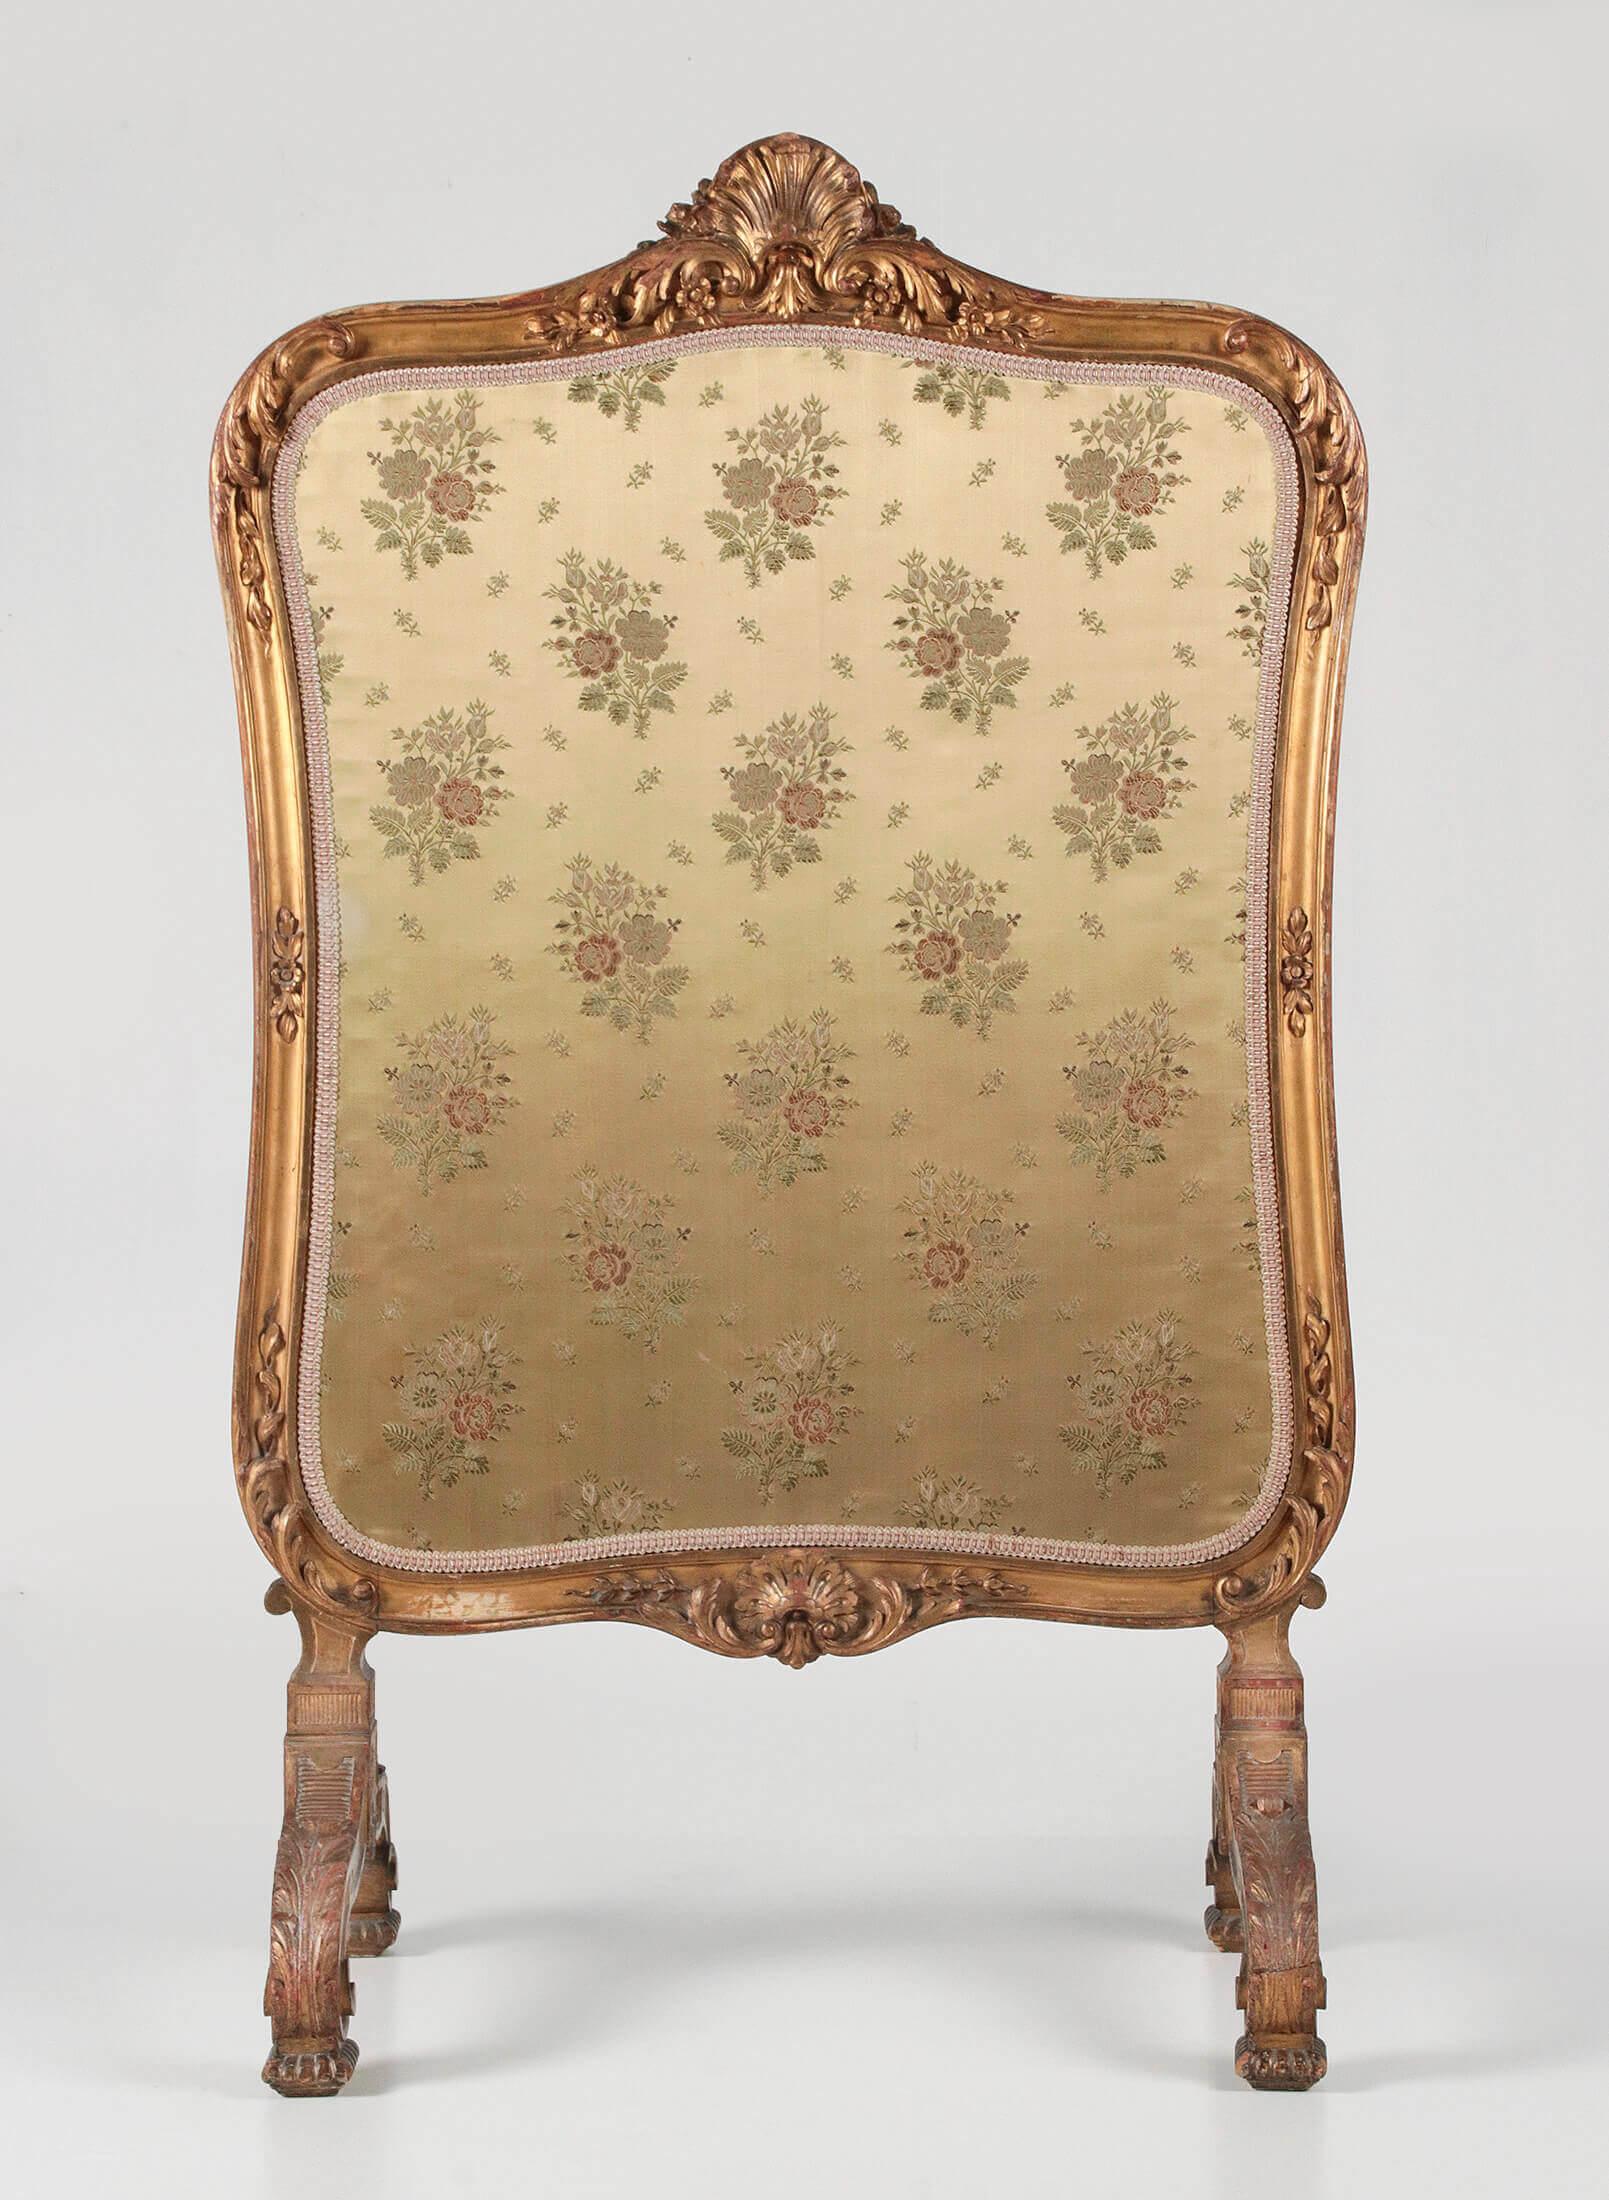 An antique gold leaf gilded wooden carved fire-screen. The style is French Régence revival. Made in France, 1870-1880. Both sides are upholstered with silk fabric. On the side the gilding have some wear.